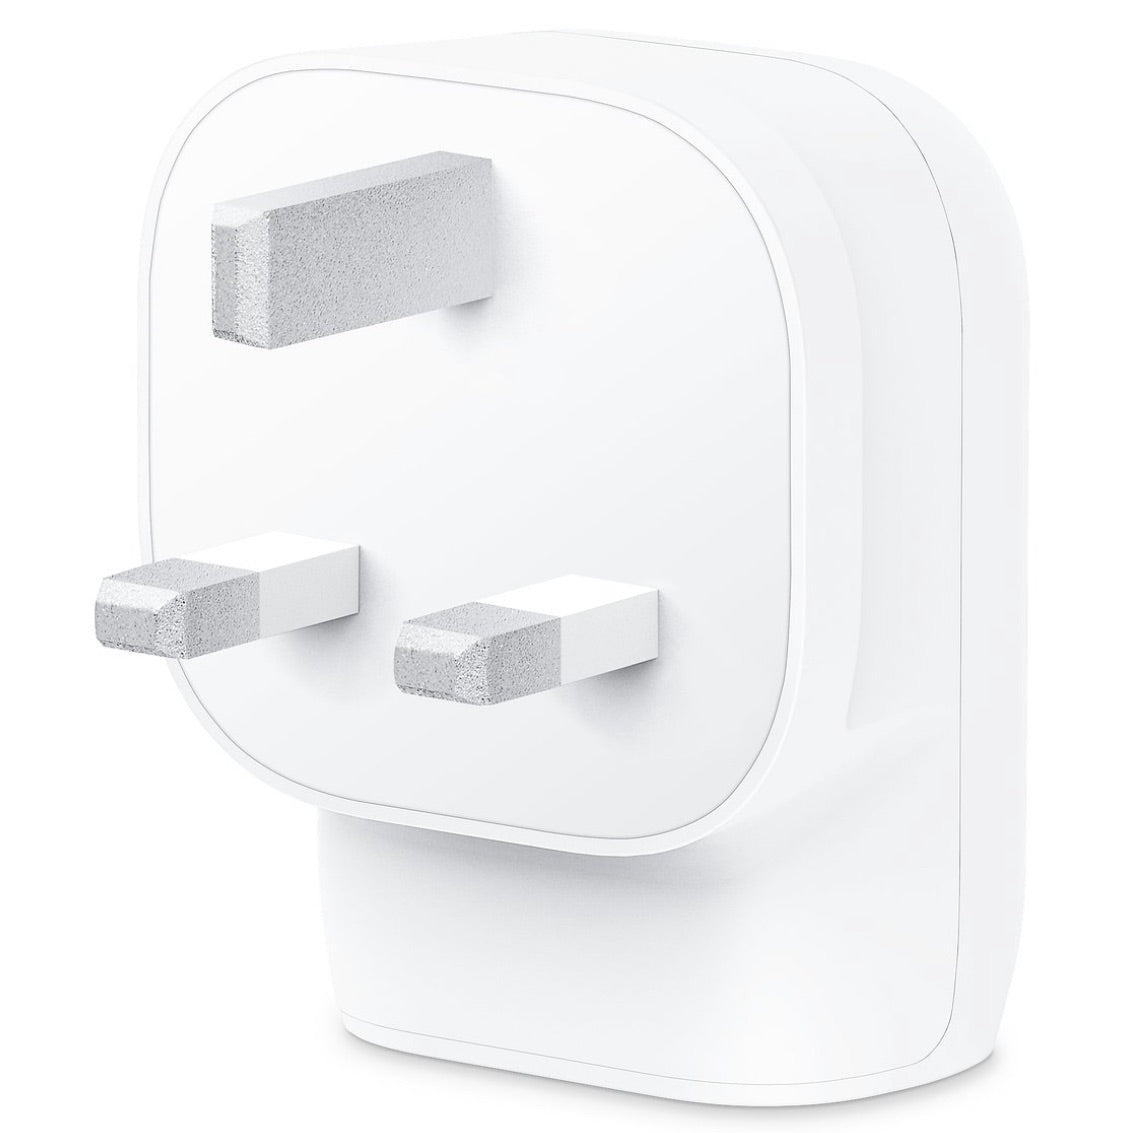 Belkin Boost USB-C + USB-A Wall Charger with USB-C to Lightning Cable (30W)